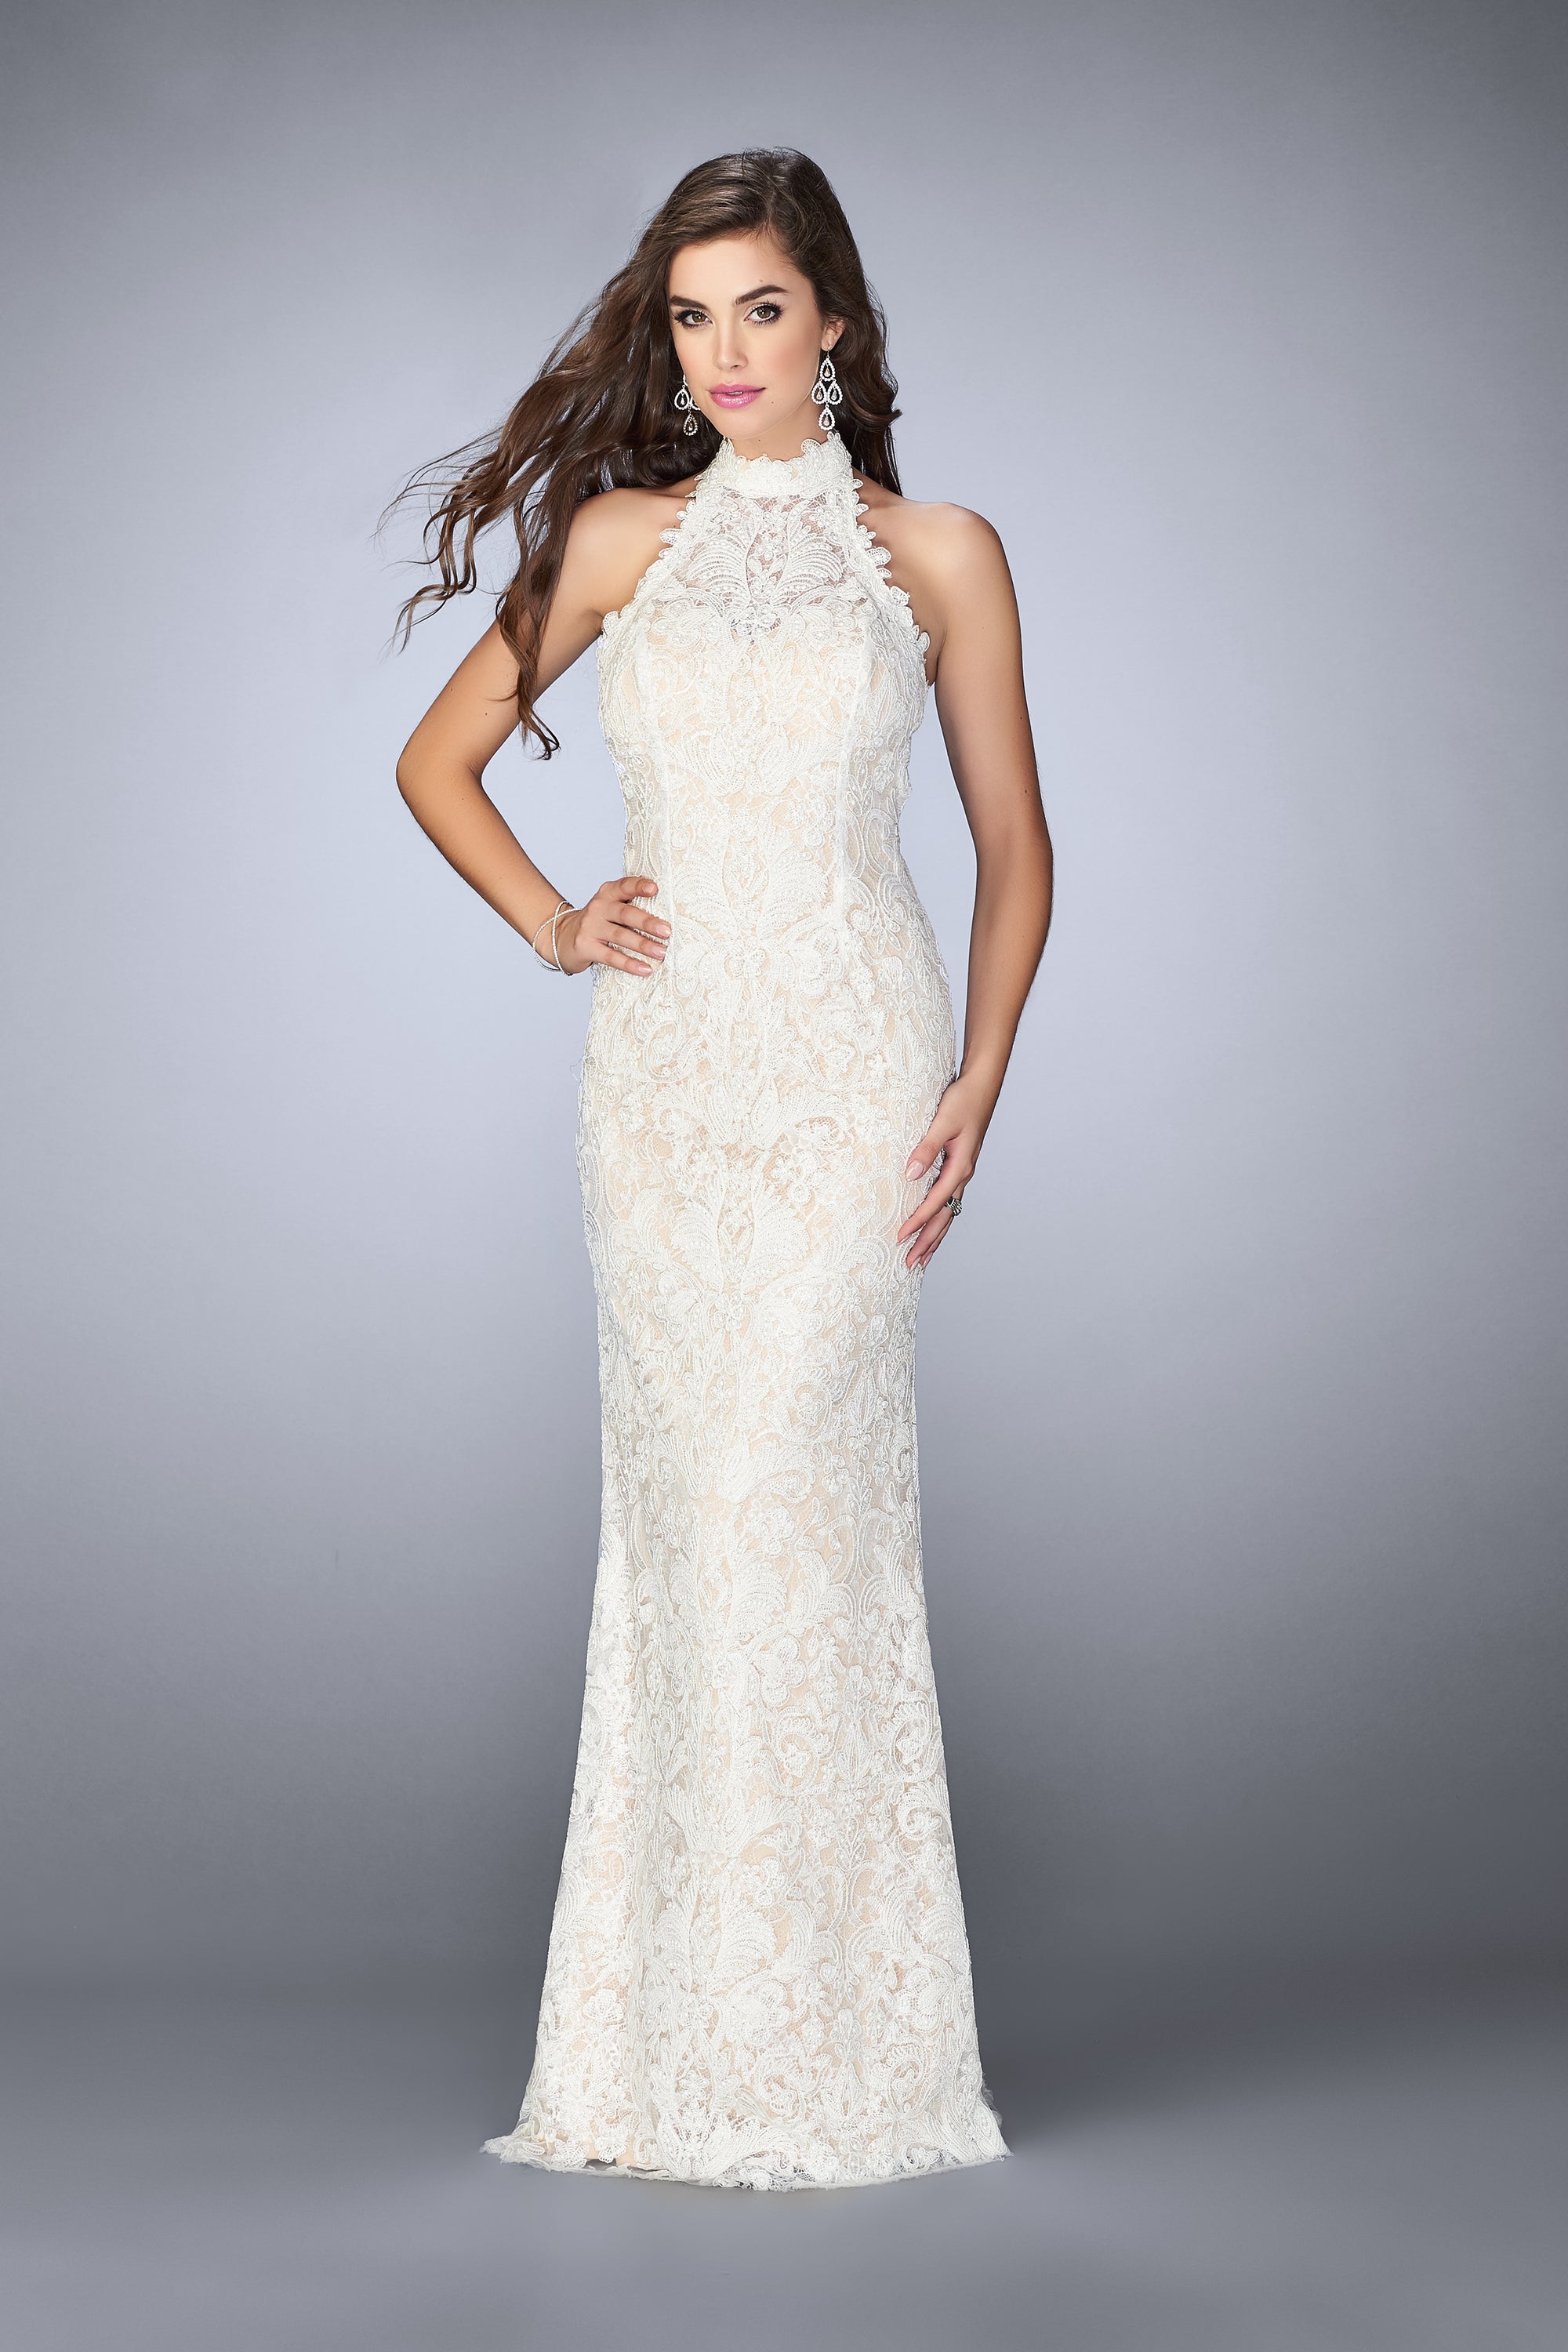 White High-Neck Open-Back Beaded Lace Prom Dress